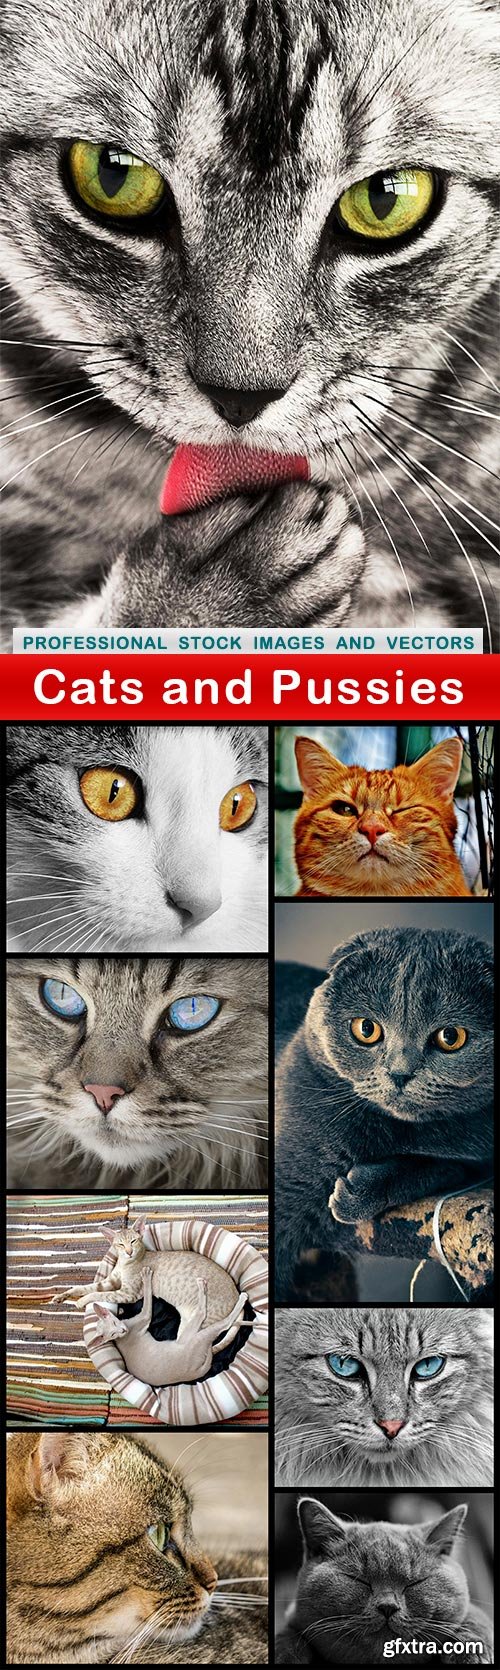 Cats and Pussies - 10 UHQ JPEG